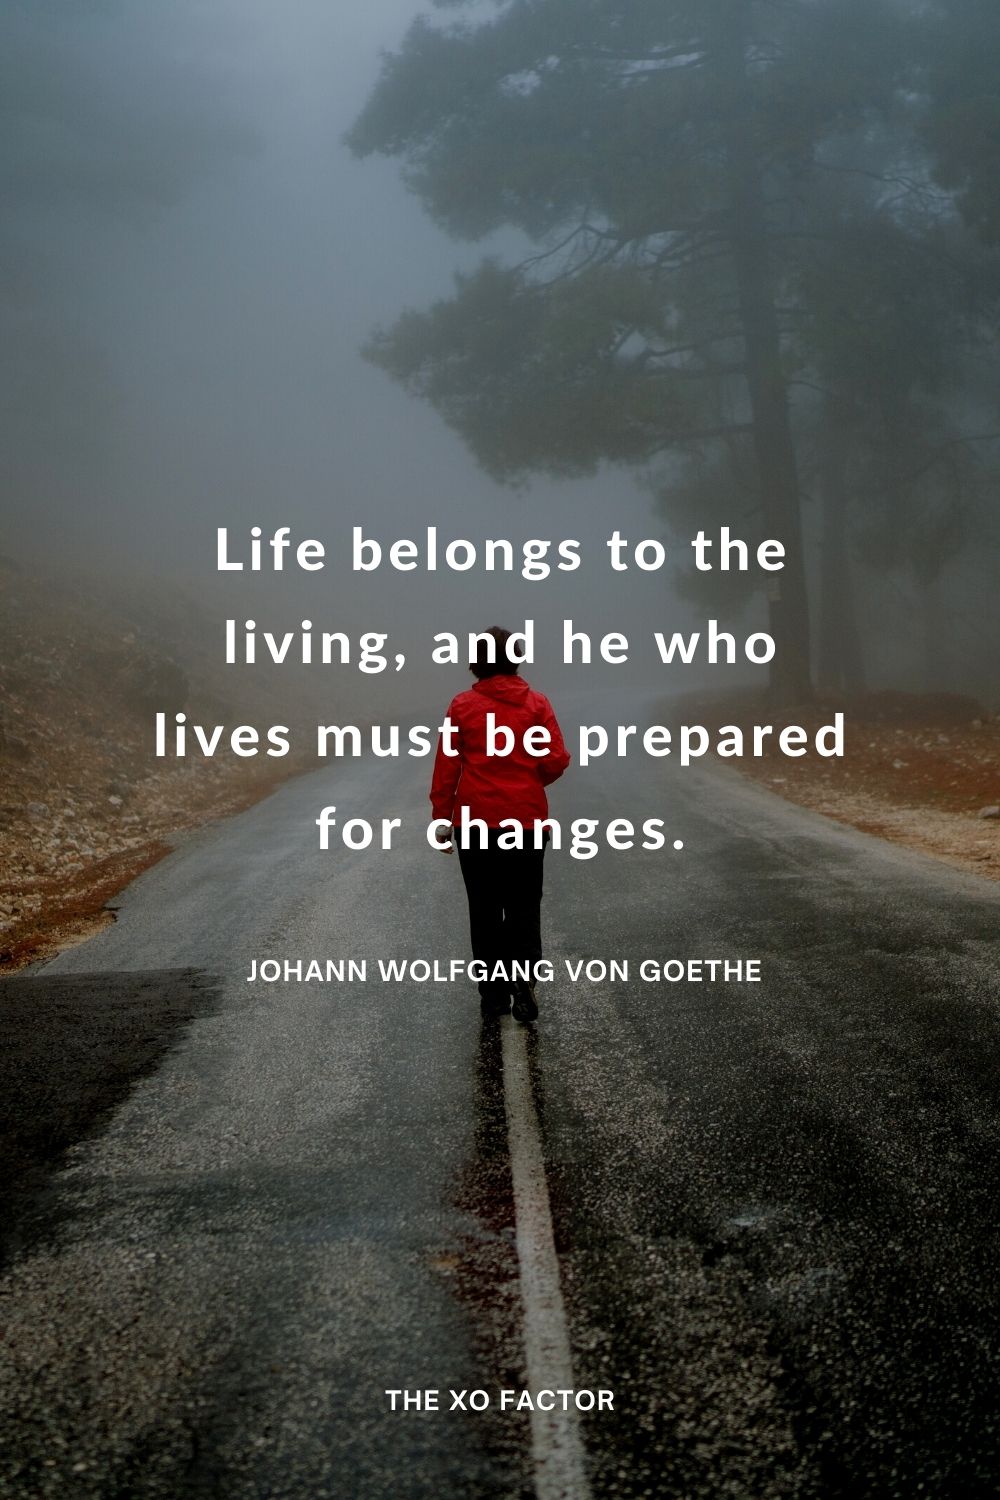 Life belongs to the living, and he who lives must be prepared for changes.